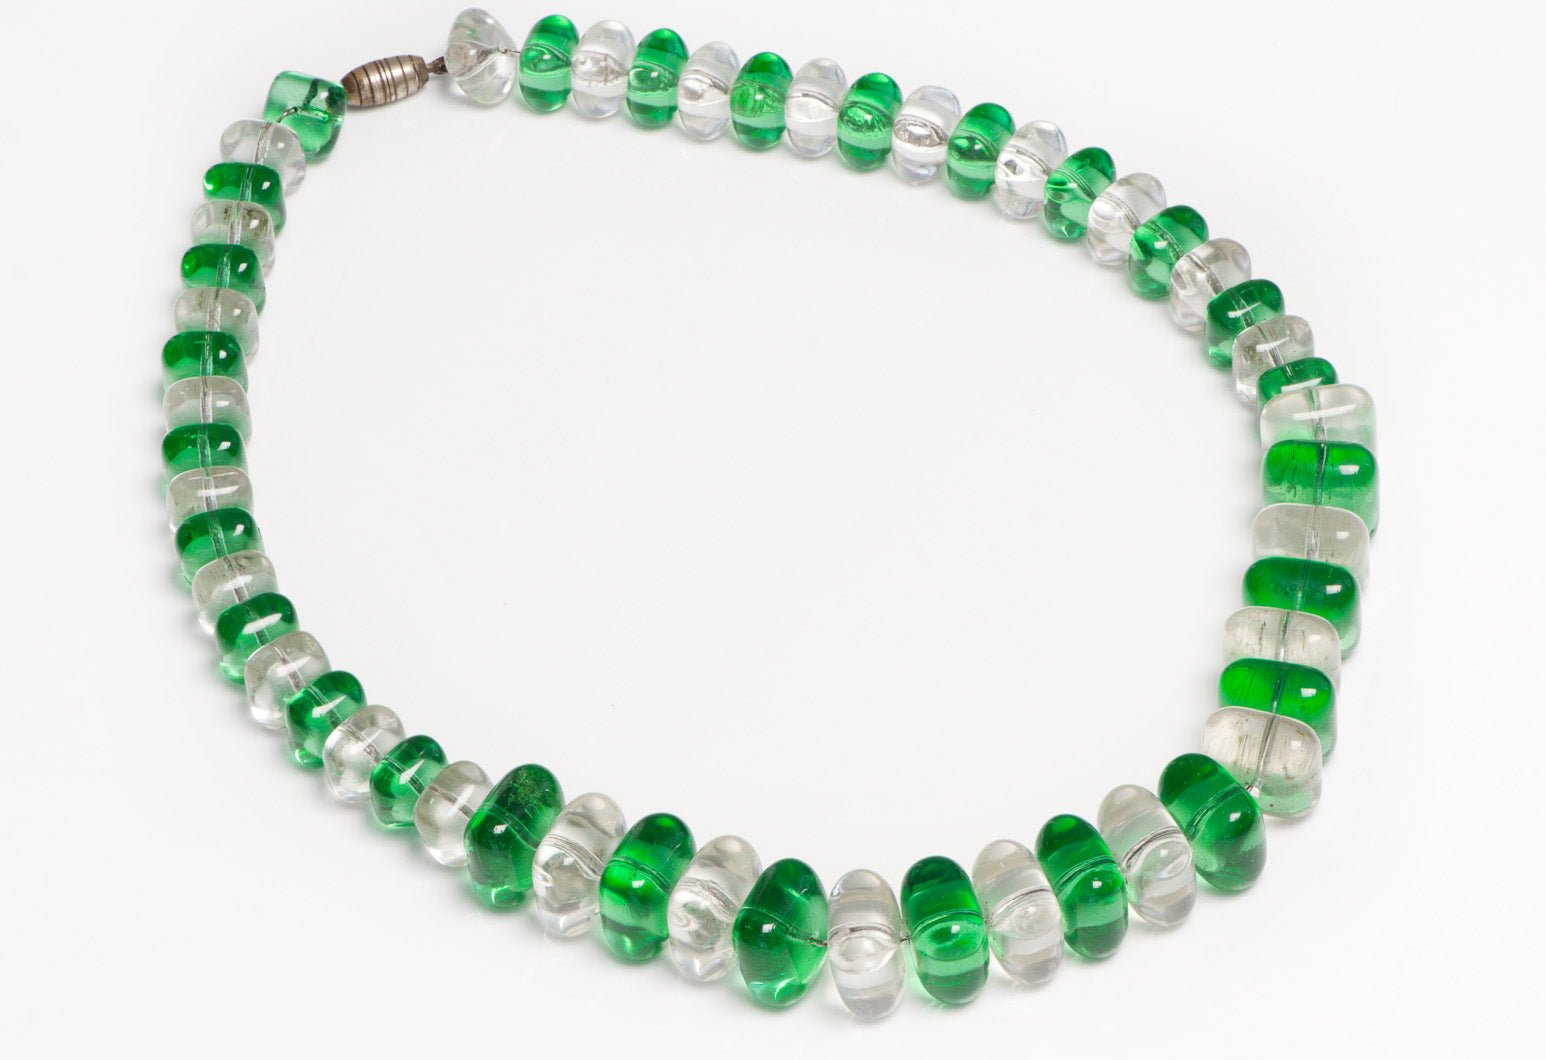 Vintage 1950's Louis Rousselet Green Glass Pillow Beads Collar Necklace